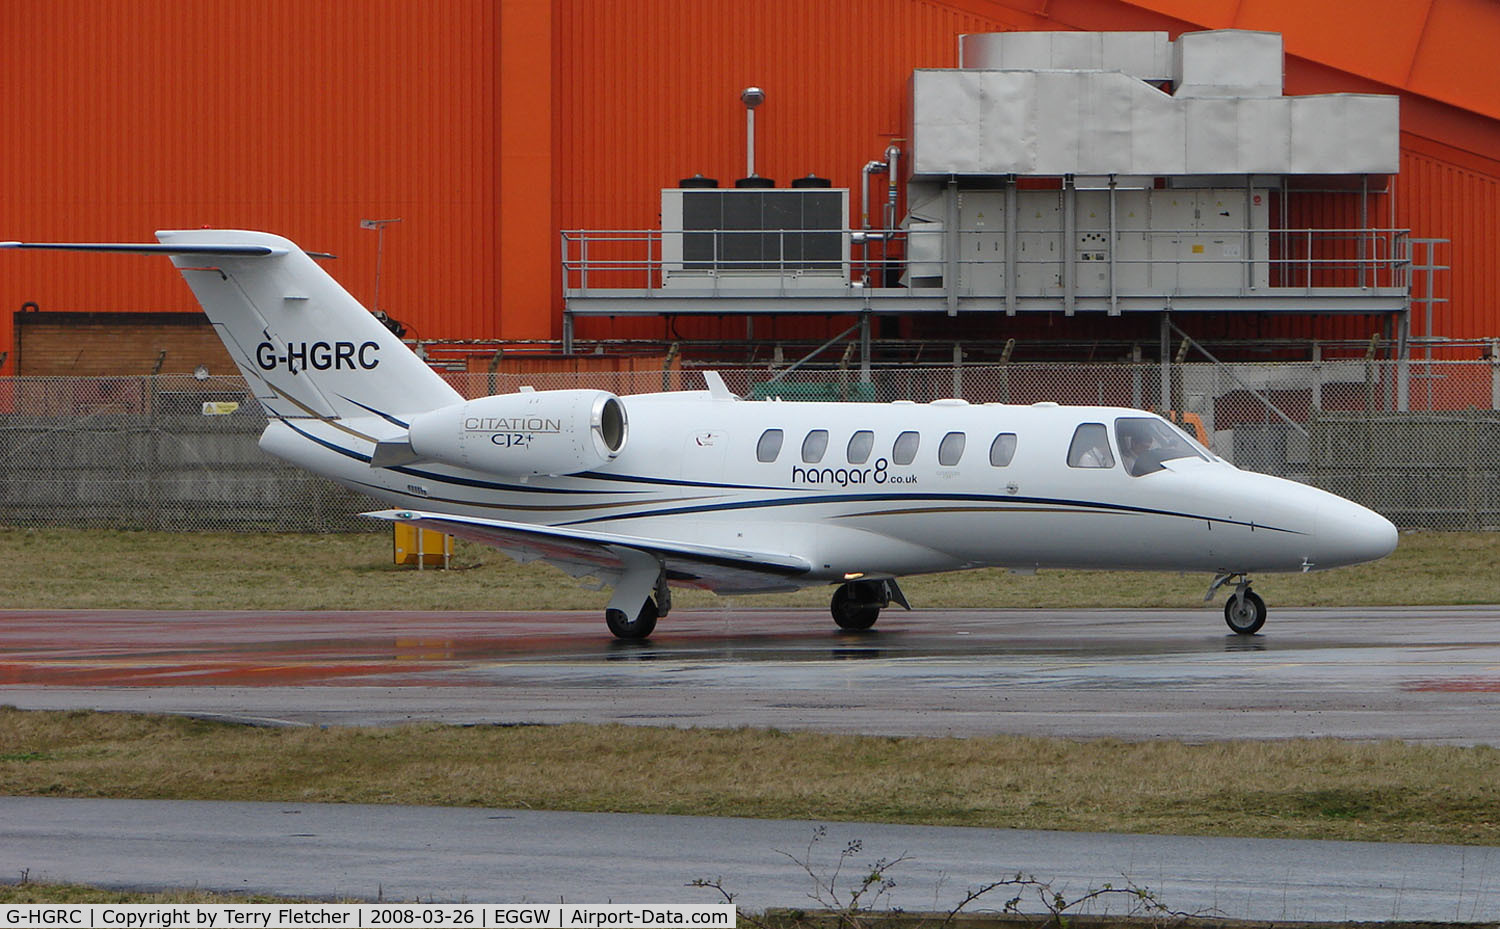 G-HGRC, 2007 Cessna 525A CitationJet CJ2+ C/N 525A-0360, Today's photo shows this Cessna 525A now wearing Hangar 8 titles